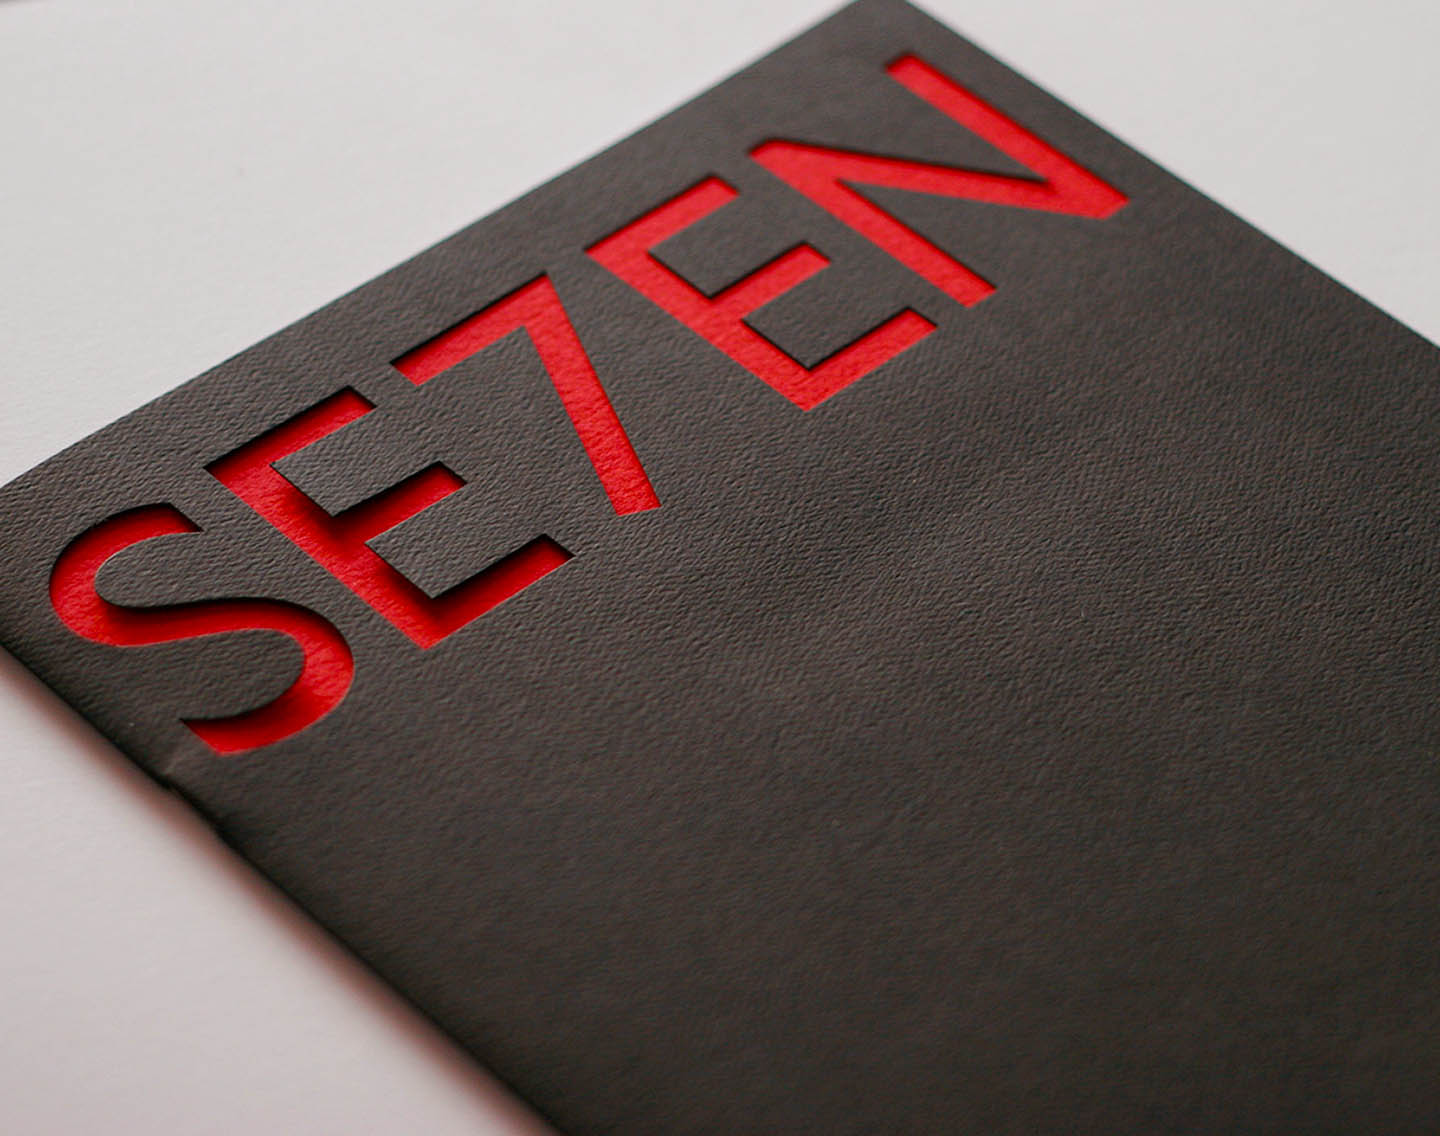 A cutout of the word SE7EN on black cover of magazine with red interior